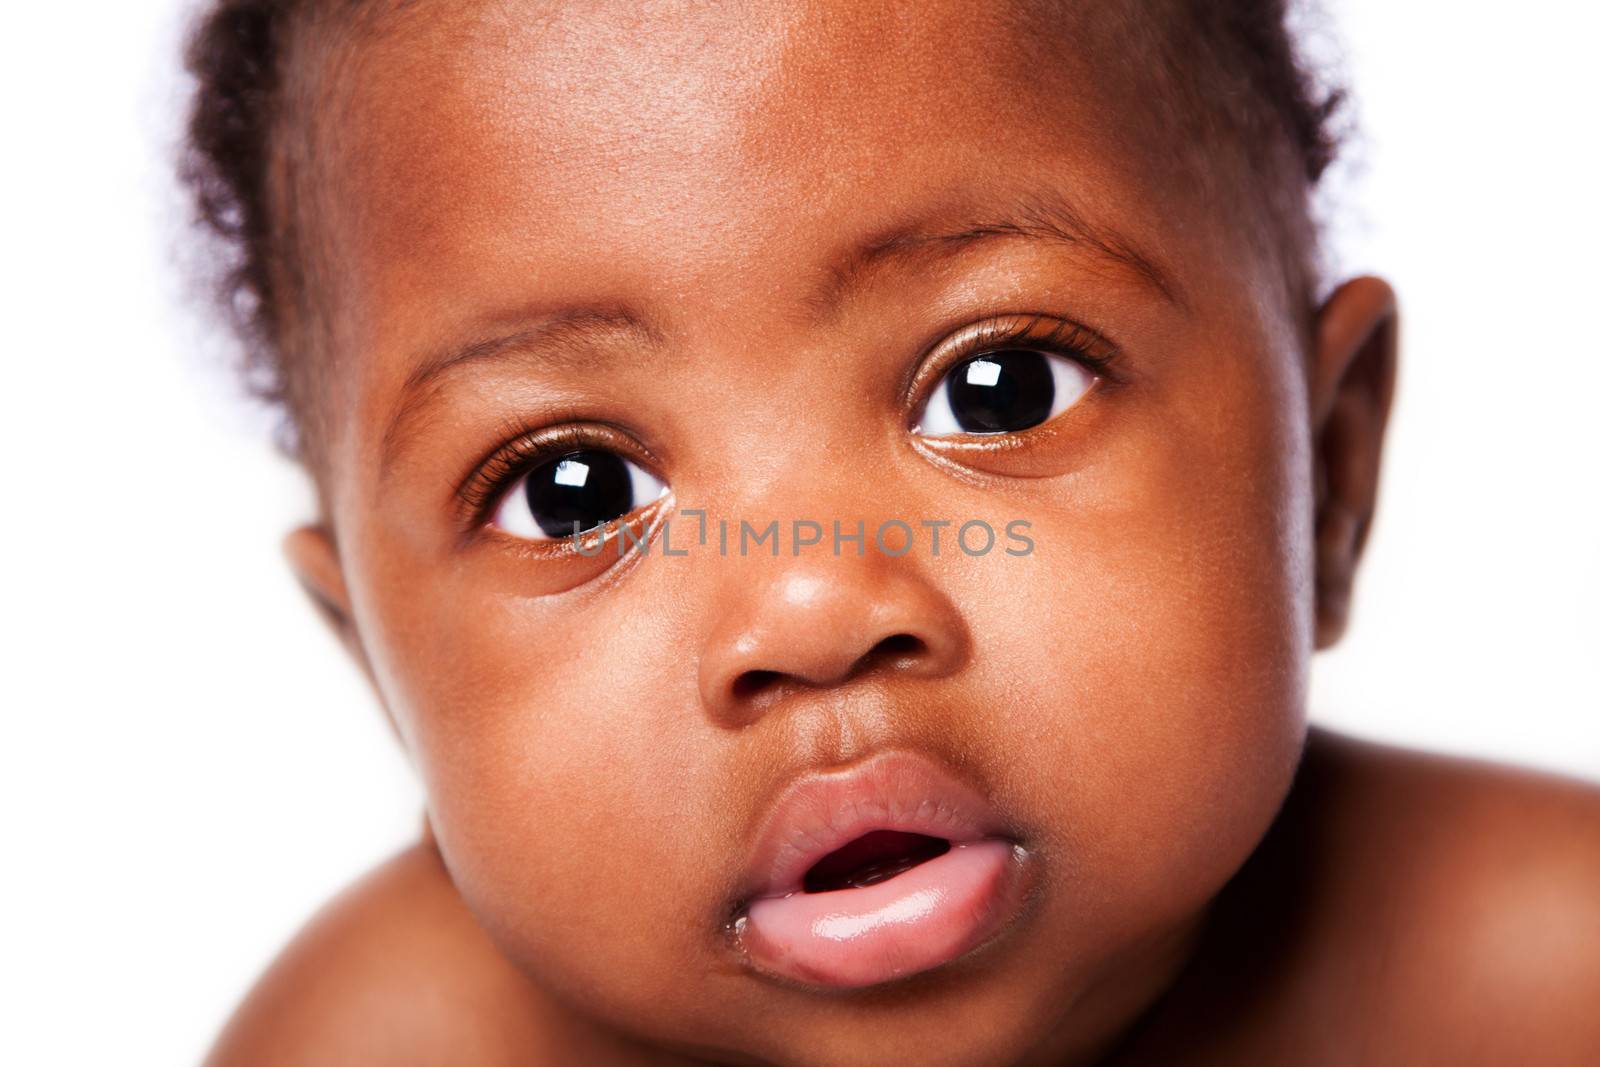 Innocent African baby face by phakimata